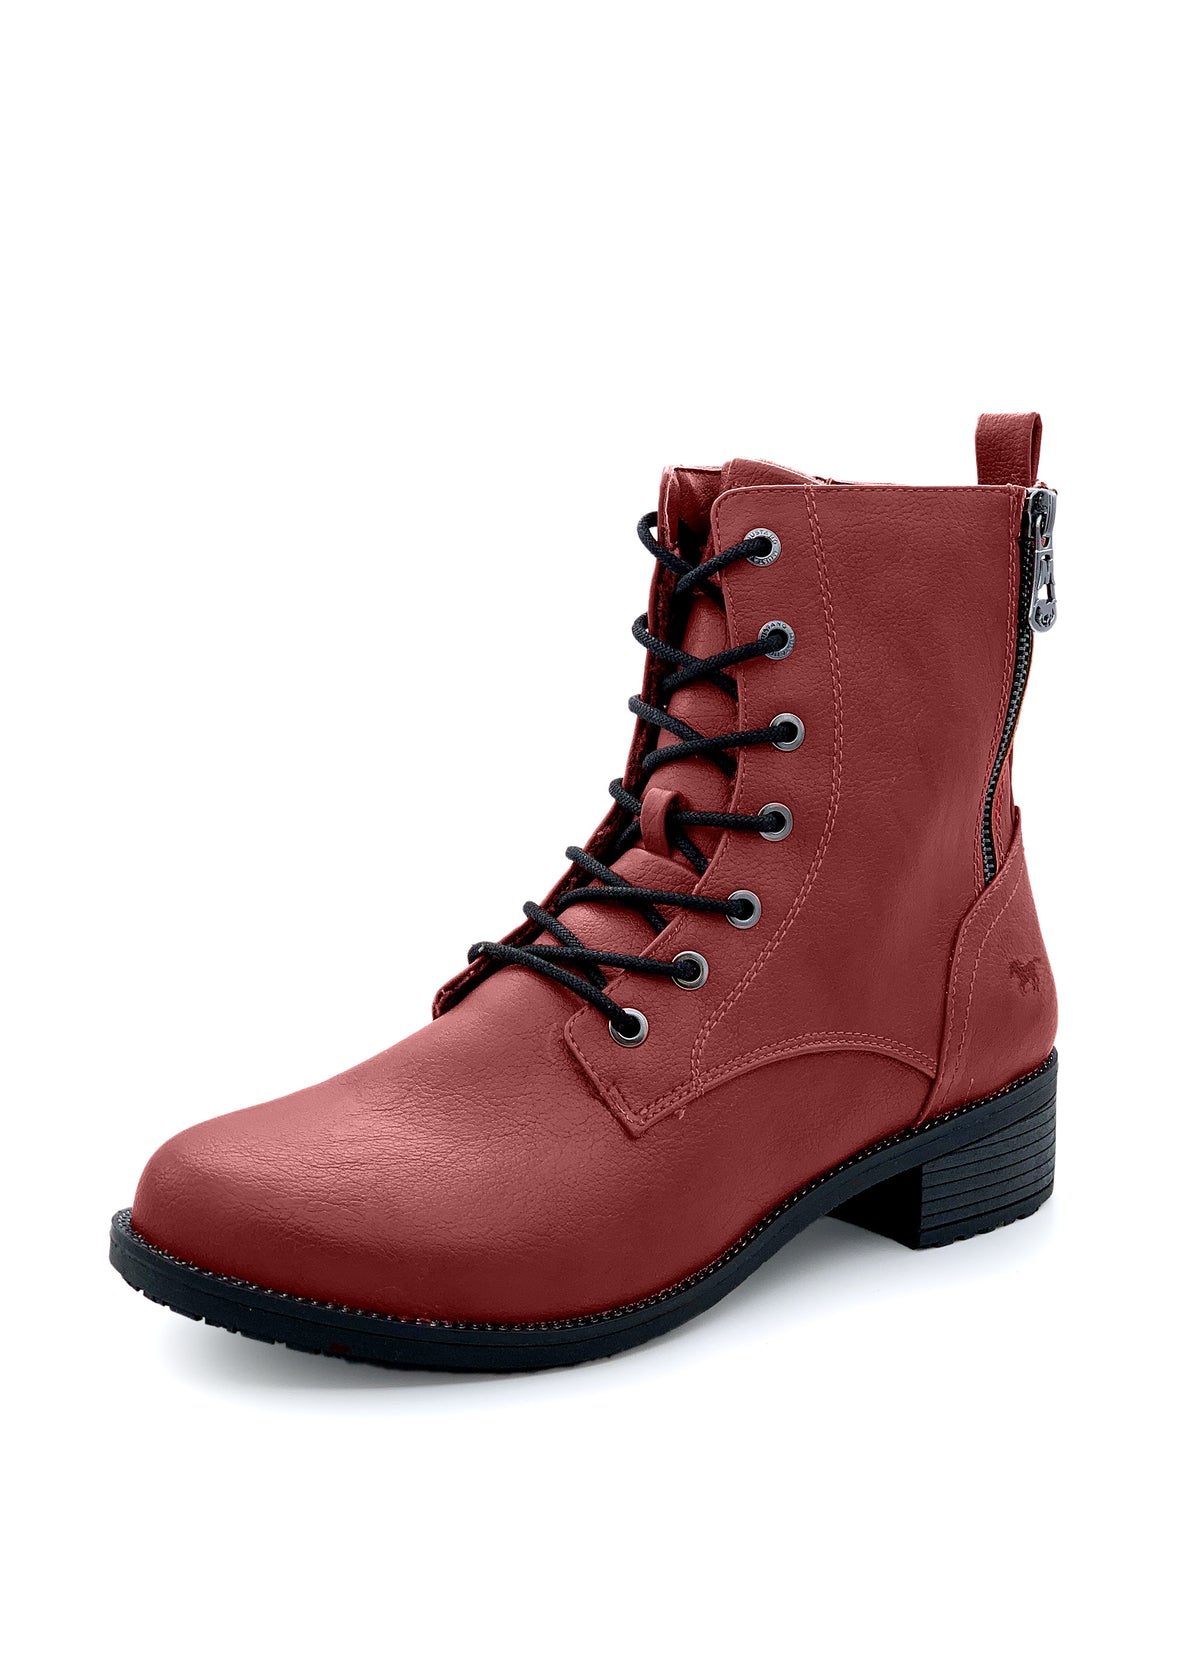 Ankle boots with stud heel - red